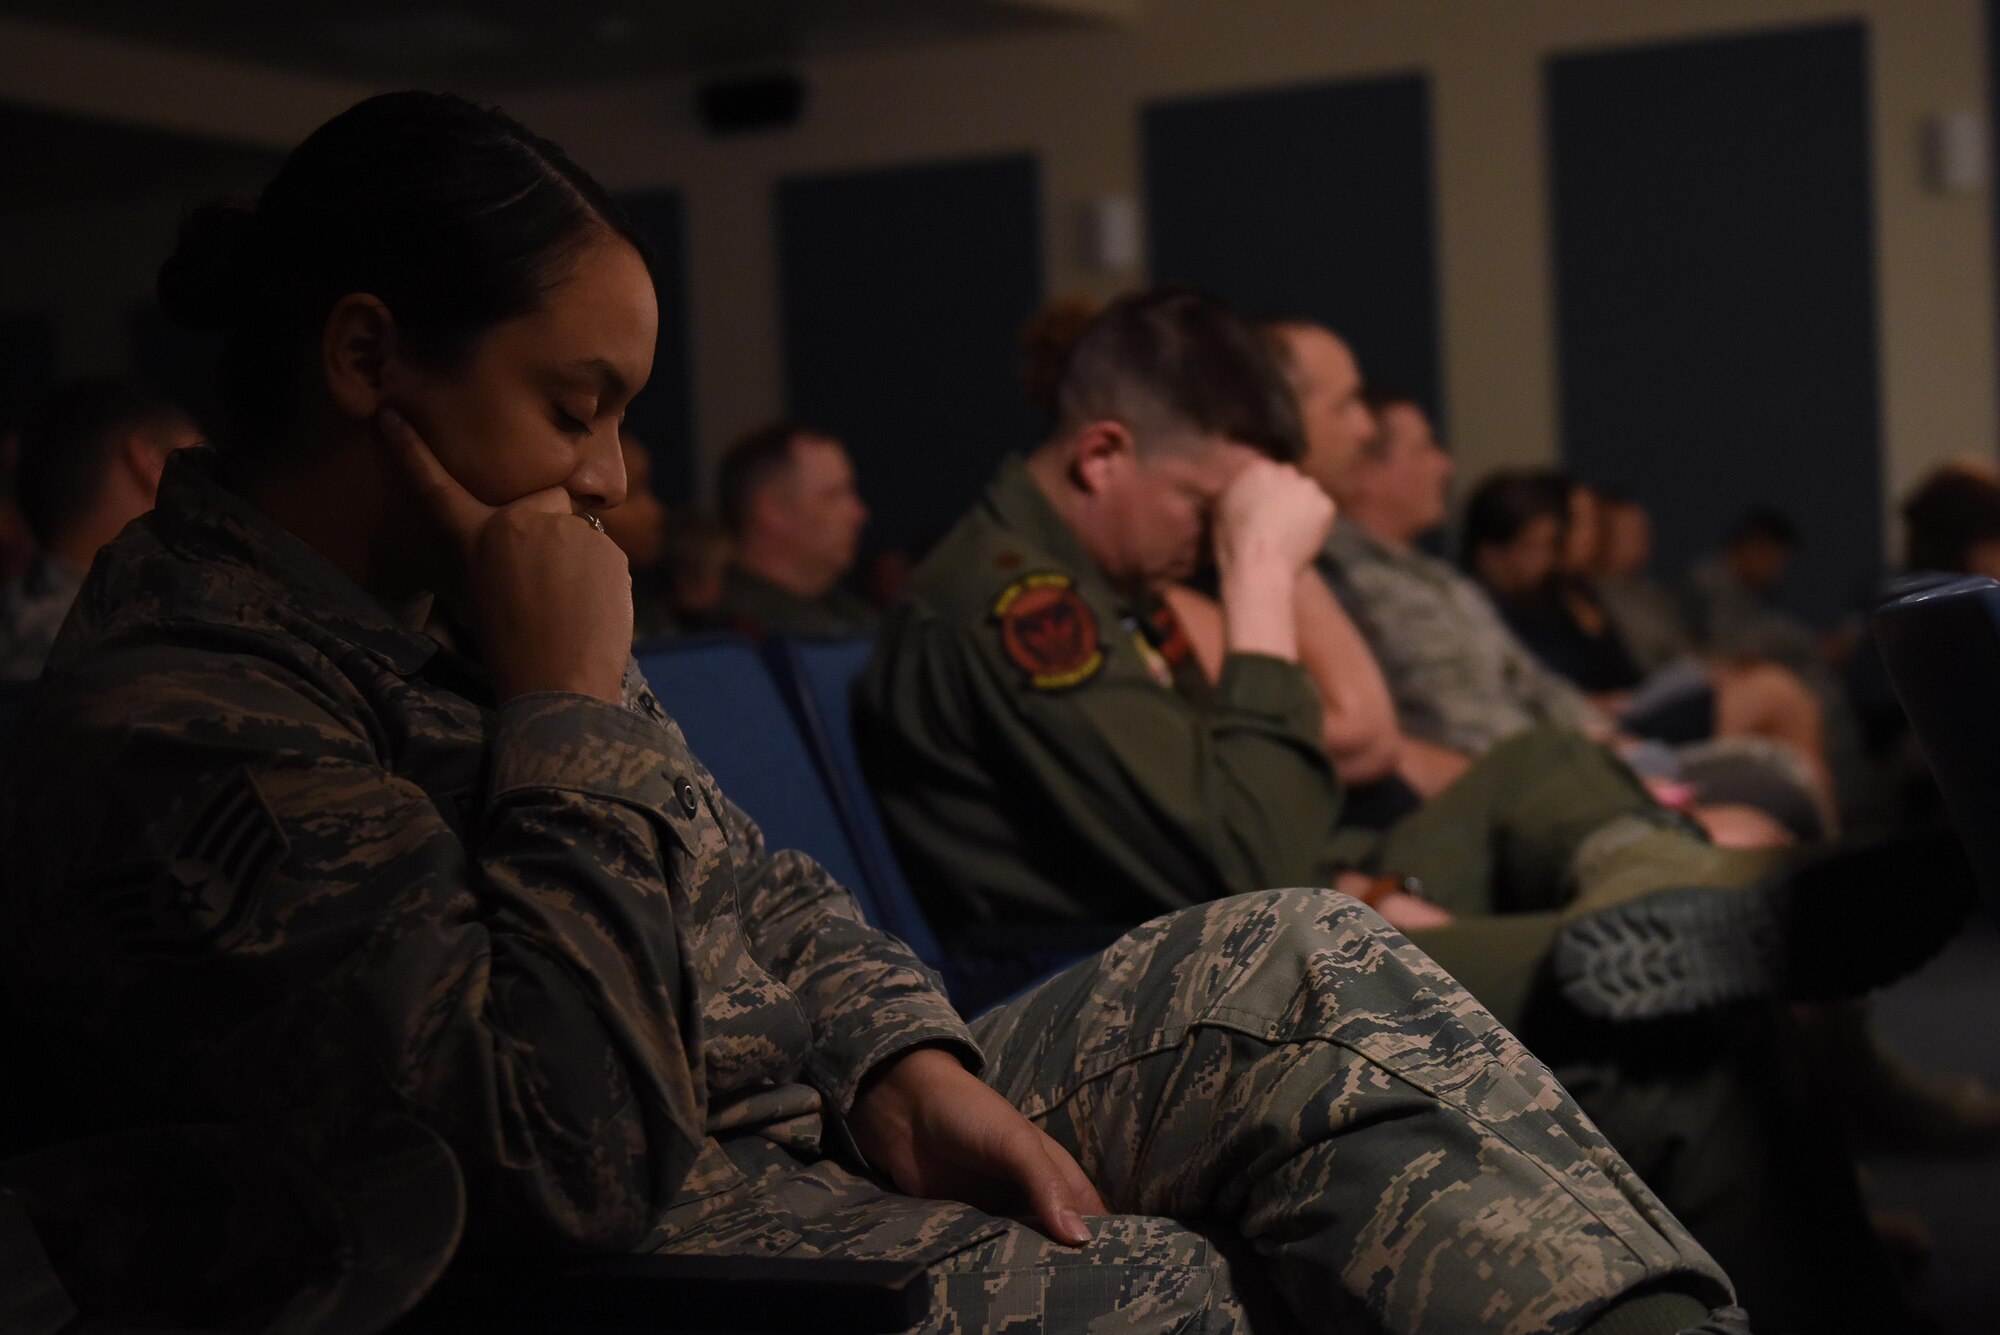 Tech. Sgt. Adam, 66th Rescue Squadron special missions aviator, asked audience members to close their eyes and allow themselves to experience his story as realistically as possible during a Storytellers event in the Creech auditorium, October 18, 2017. Adam began by describing what he could see, then moved to what he felt and finally shouted to the crowd the chaos that occurred over his headset. (U.S. Air Force photo/Airman 1st Class Haley Stevens)